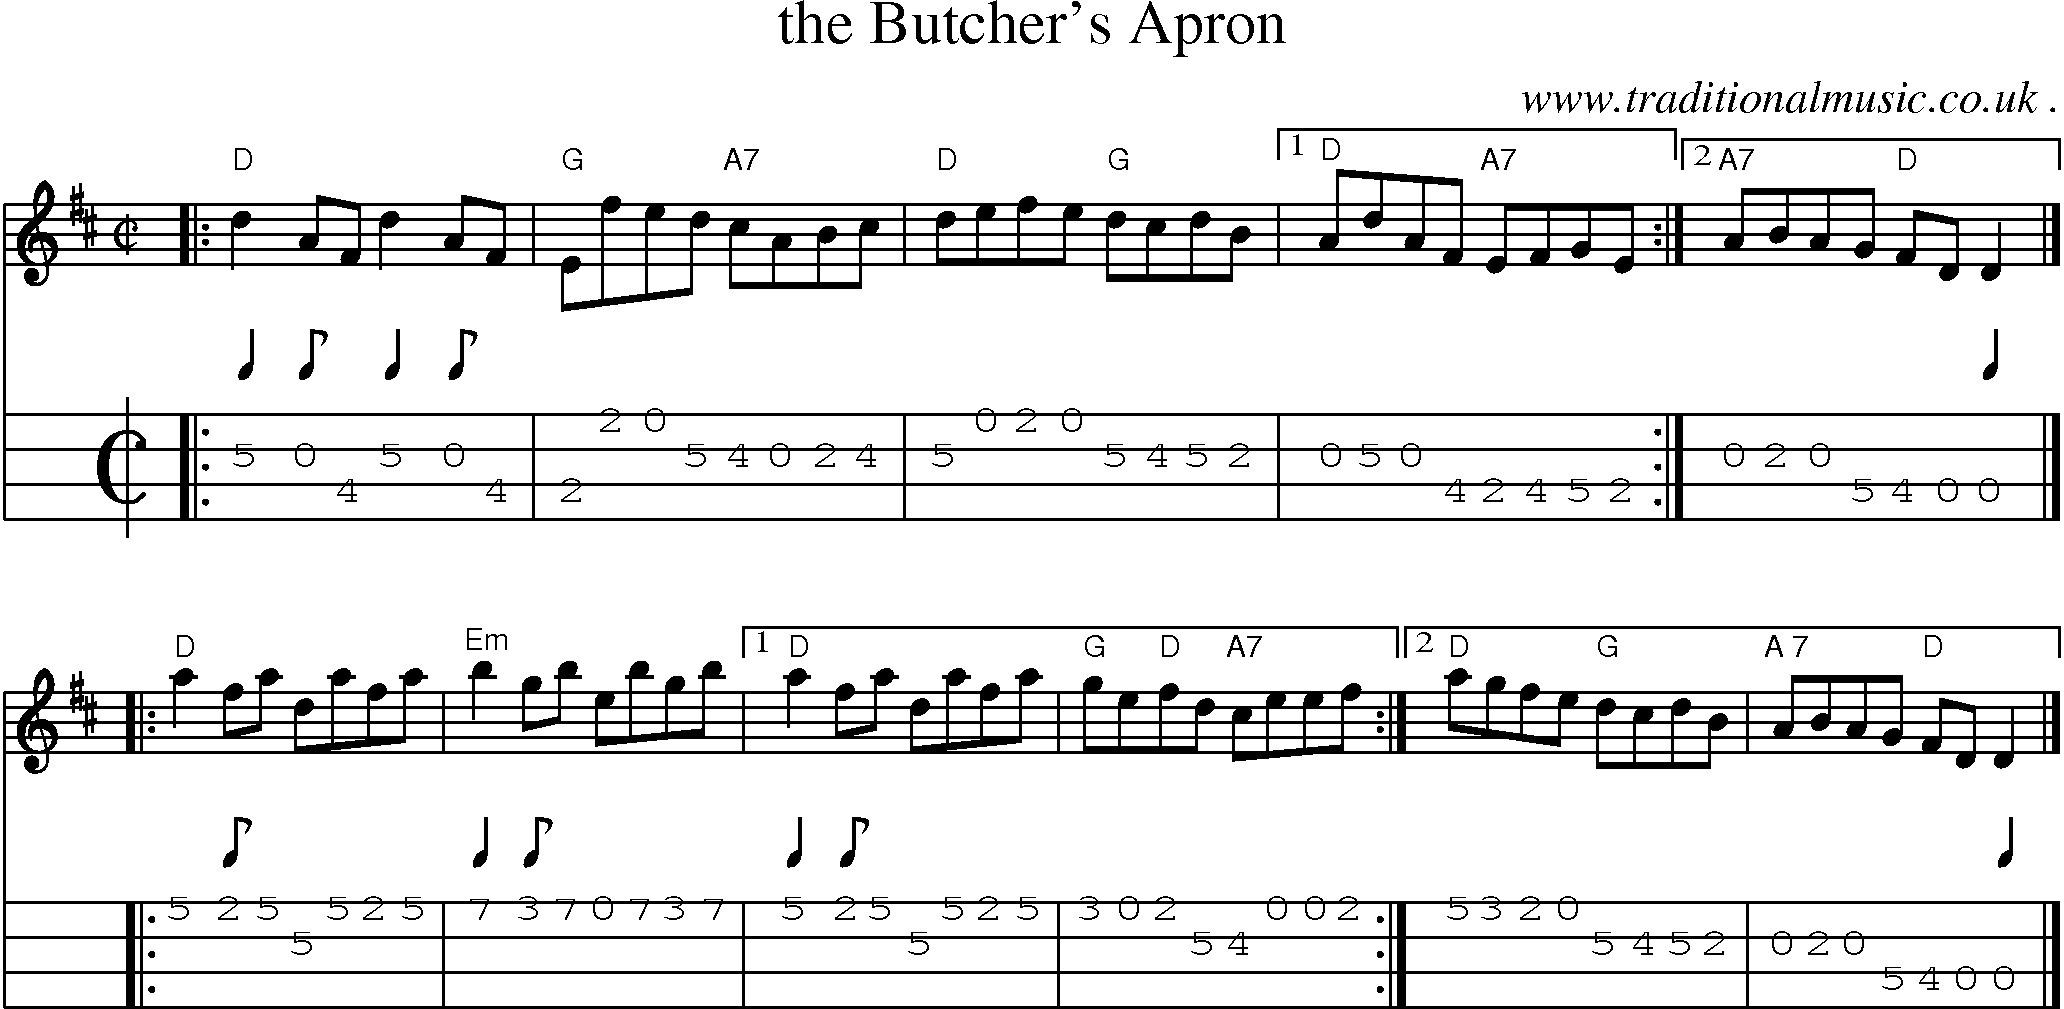 Sheet-music  score, Chords and Mandolin Tabs for The Butchers Apron